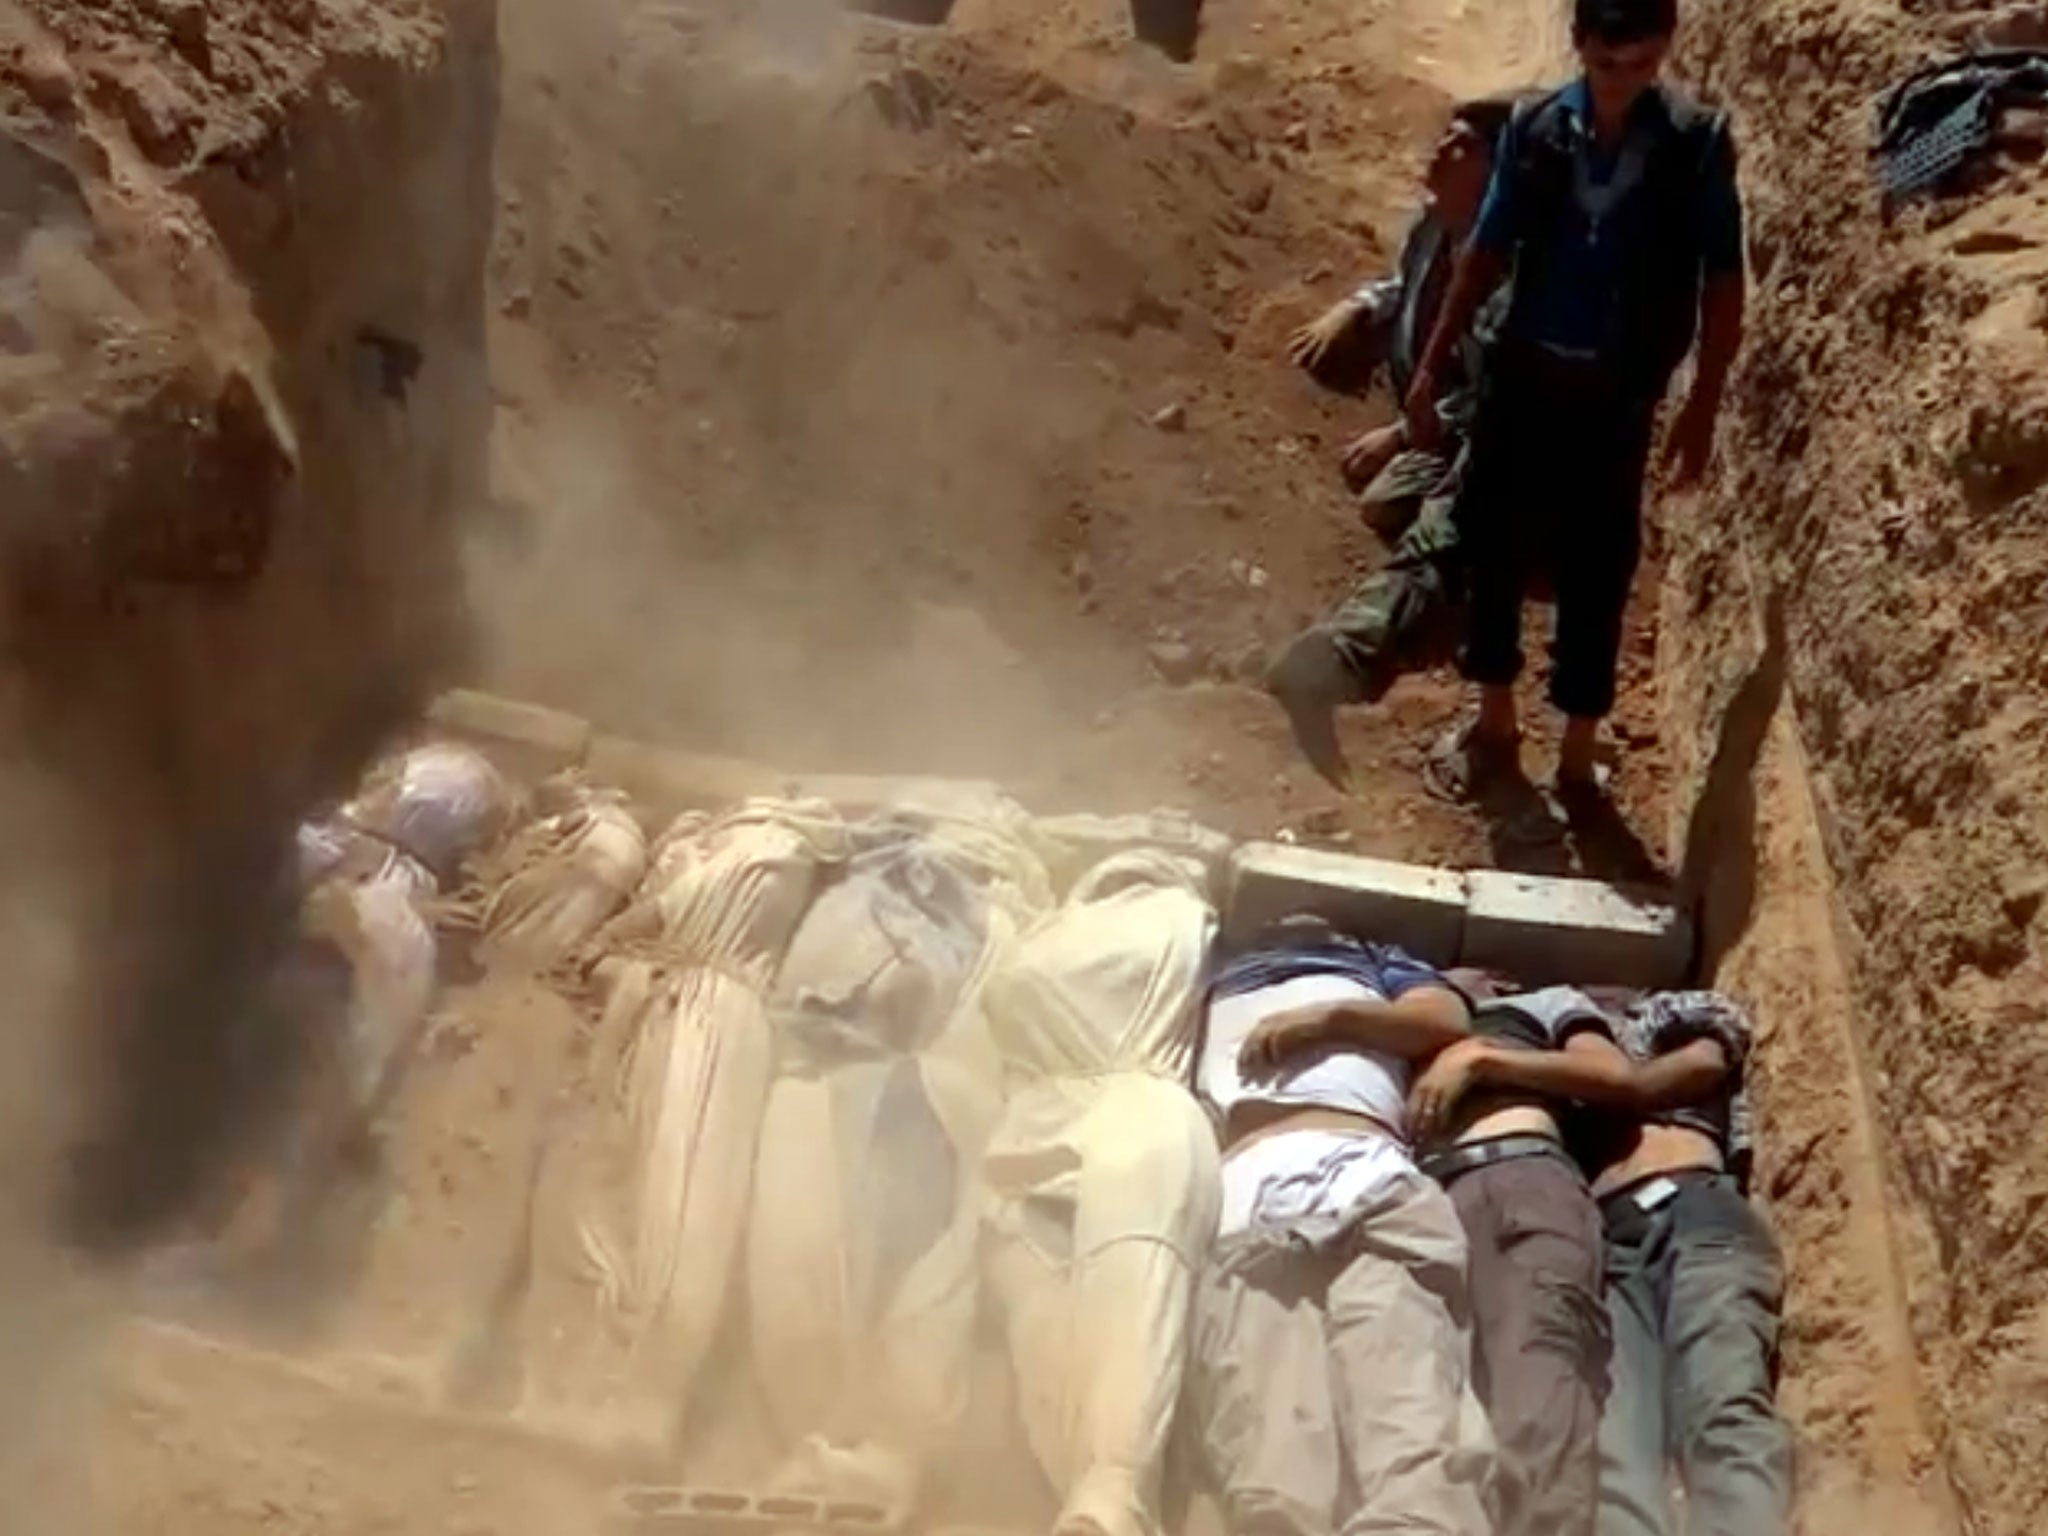 A mass grave in Damascus allegedly containing civilian victims of a toxic gas attack